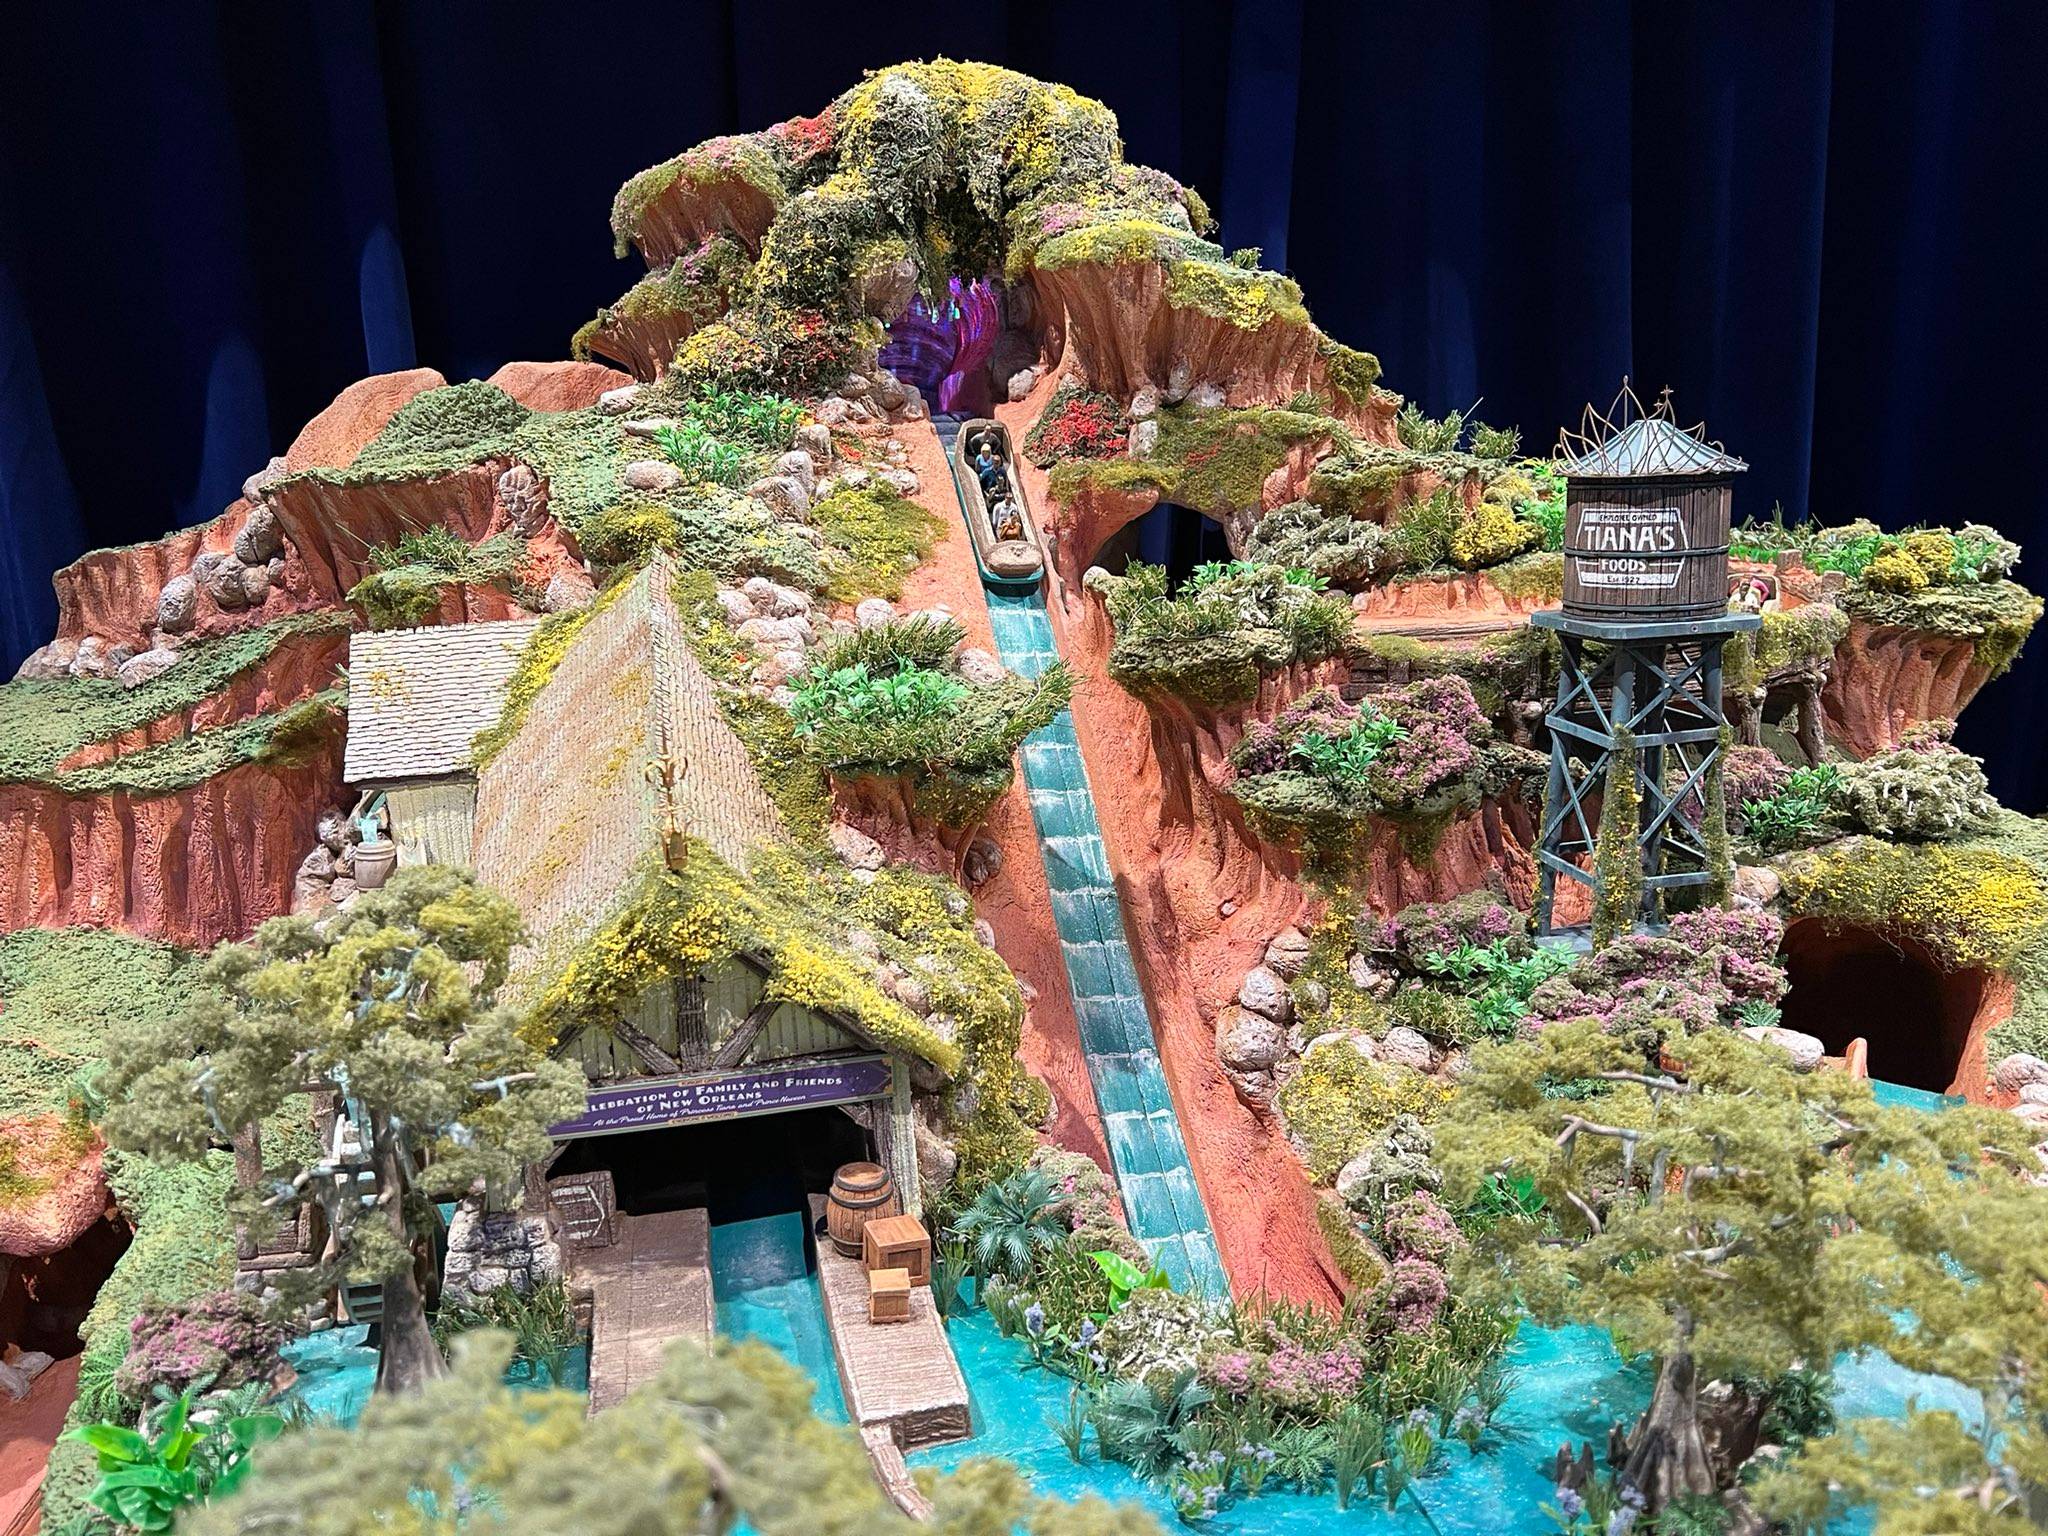 New model of Tiana's Bayou Adventure on display at D23 Expo